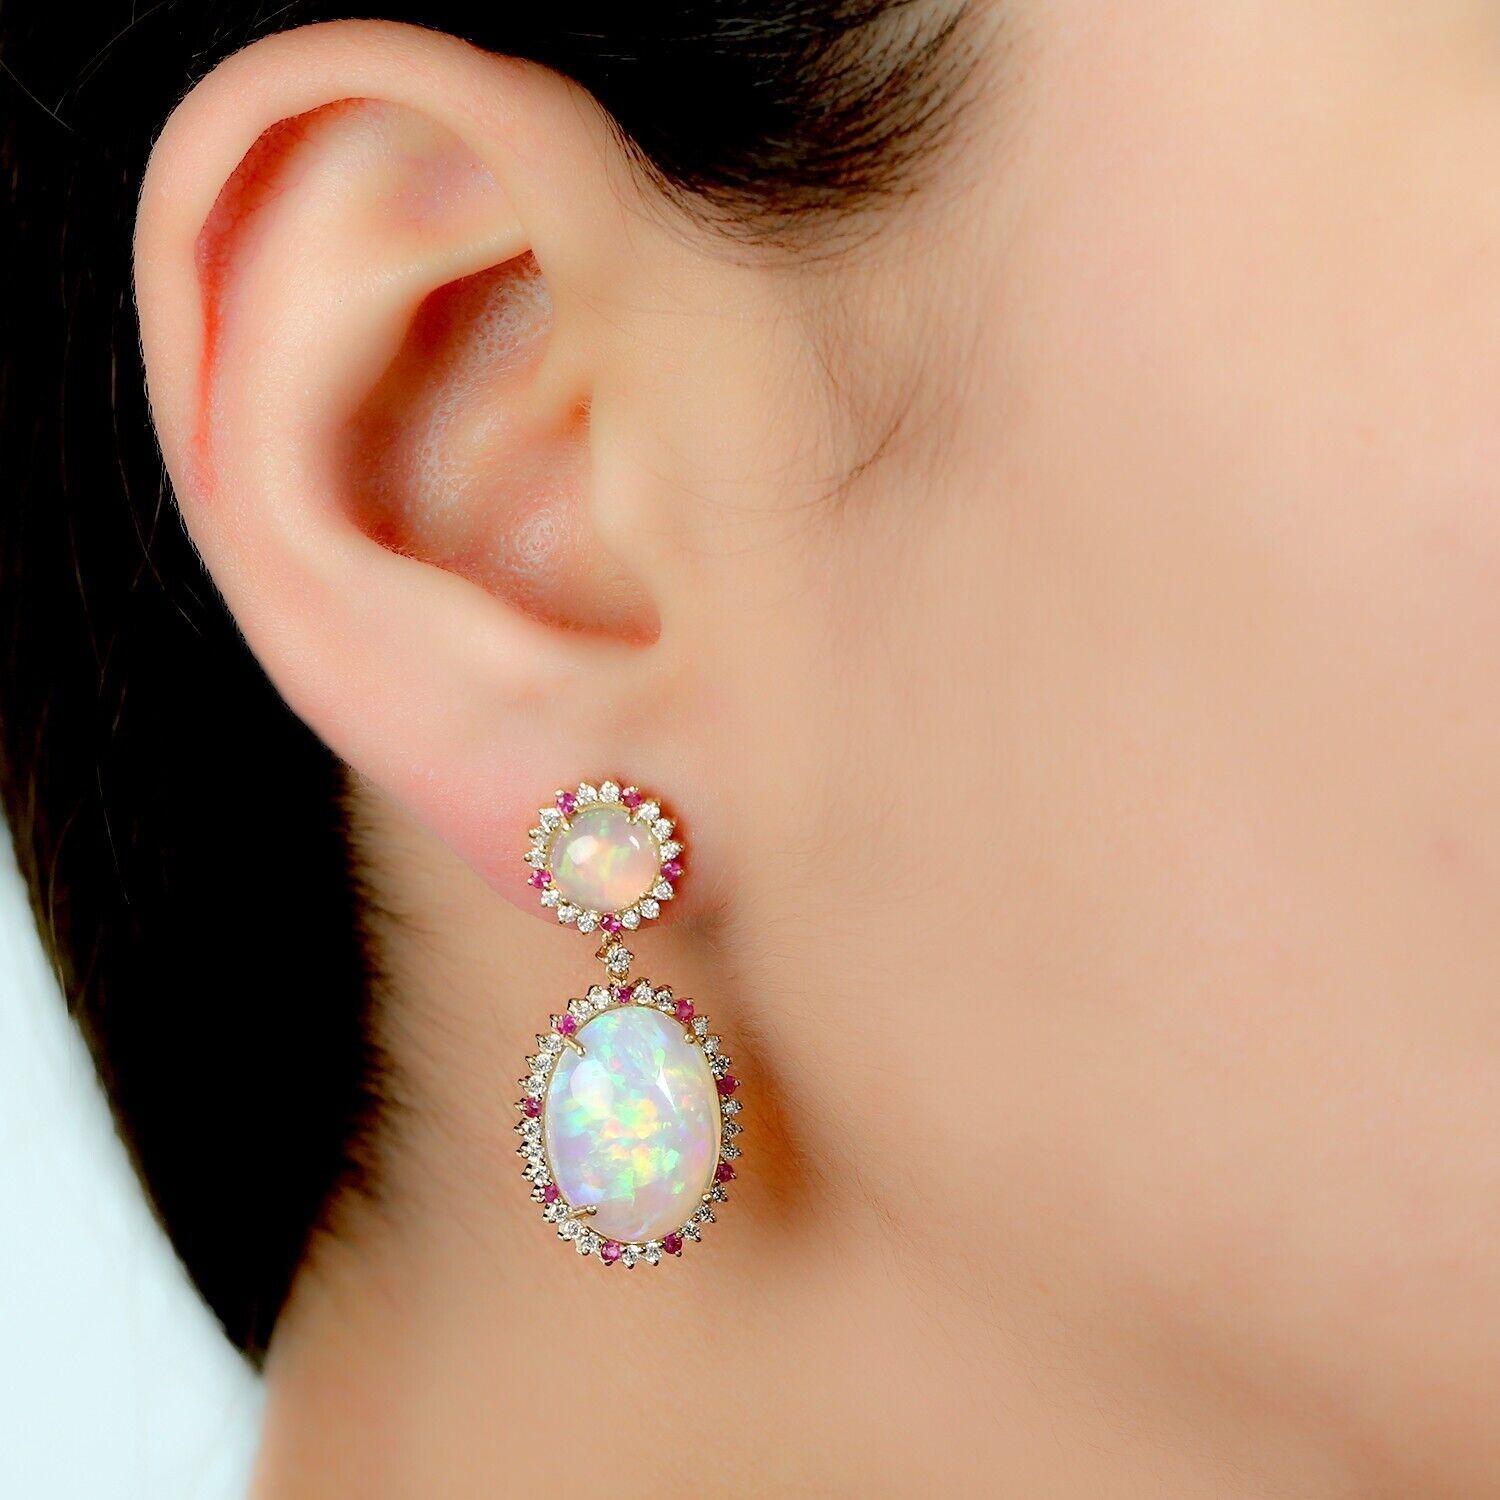 Cast in 14 karat gold. These earrings are hand set in 13.05 carats Ethiopian opal, .34 carats ruby, and .82 carats of sparkling diamonds. 

FOLLOW MEGHNA JEWELS storefront to view the latest collection & exclusive pieces. Meghna Jewels is proudly